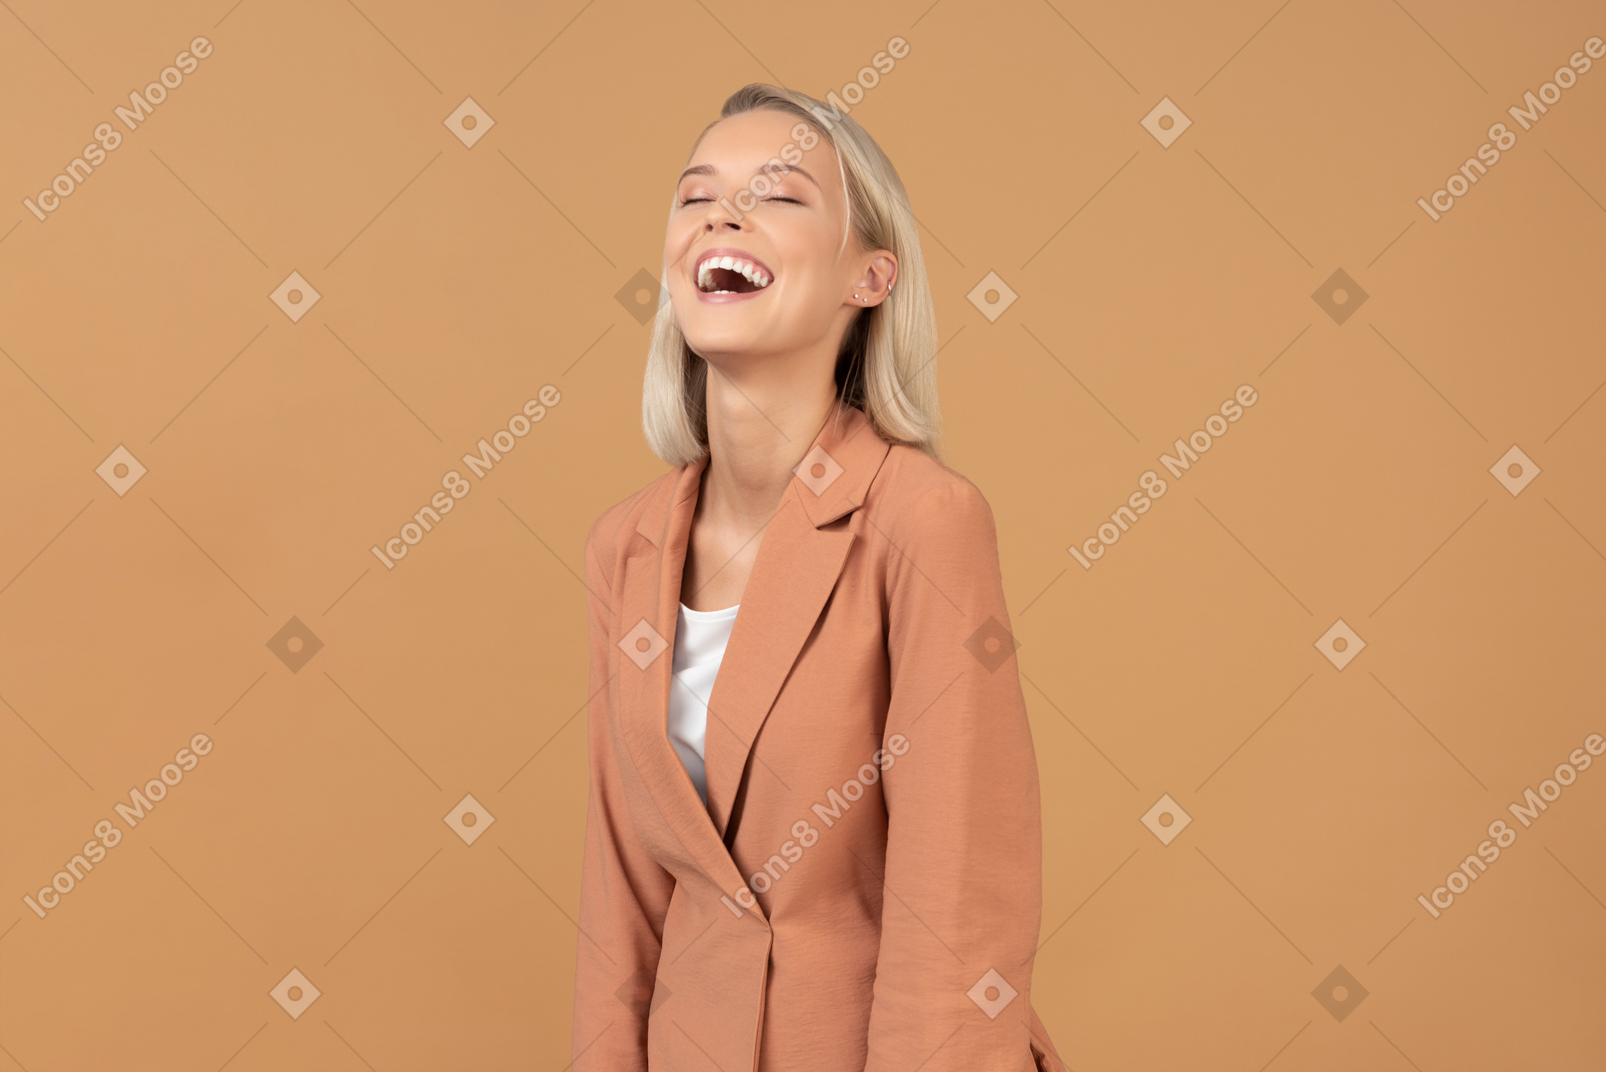 She can't help laughing